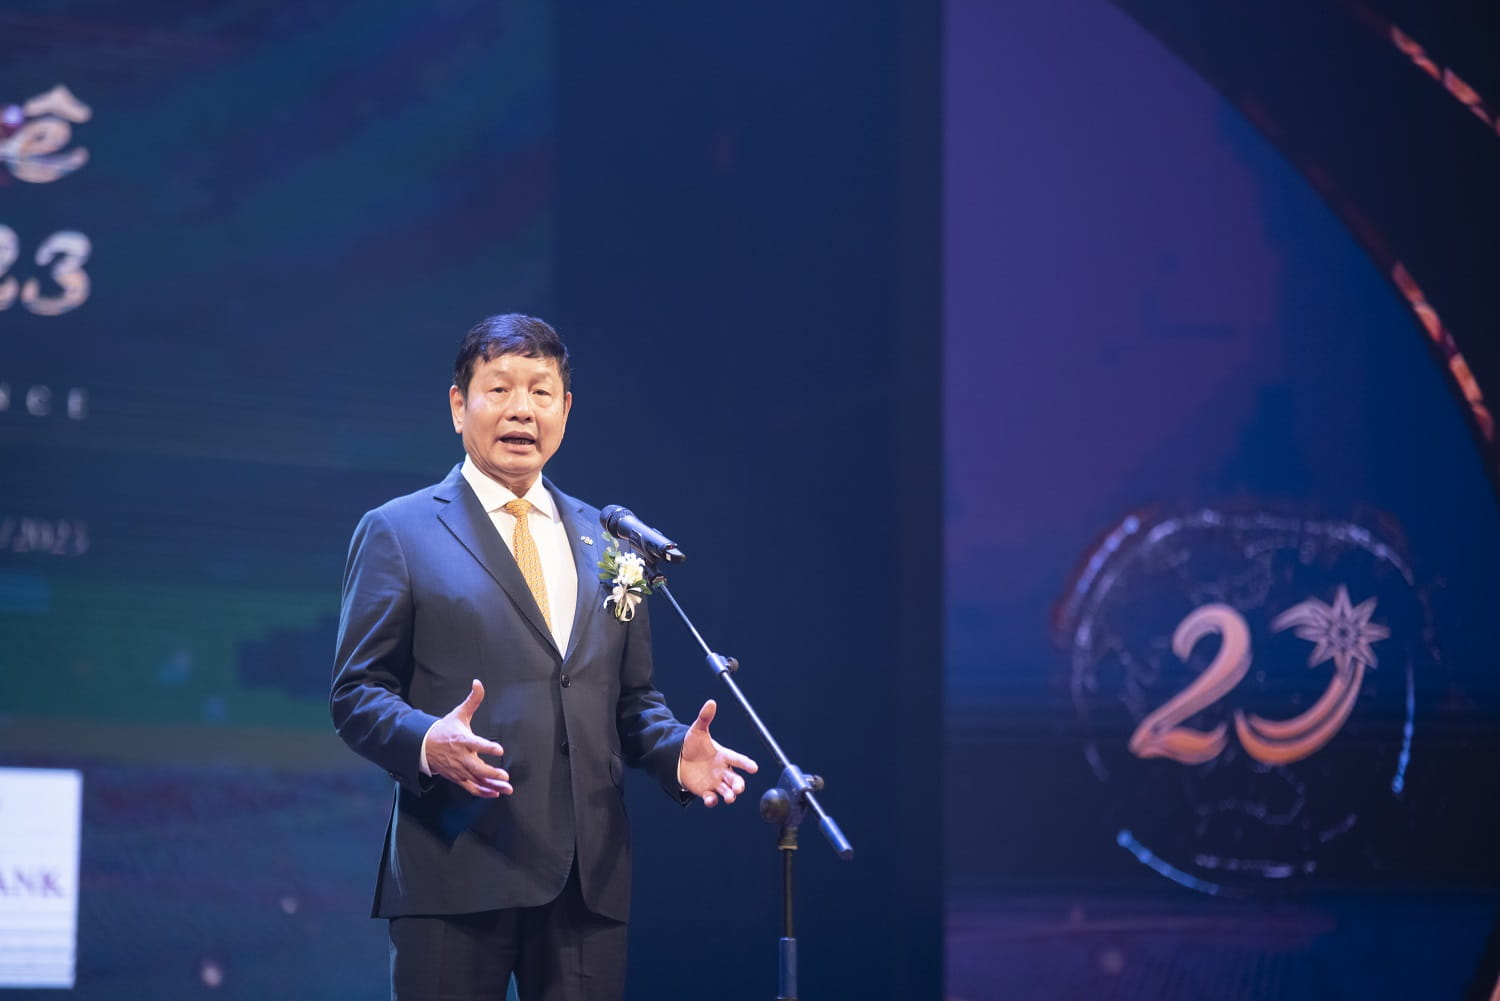 Mr. Truong Gia Binh - Chairman of FPT - shared at the award ceremony.